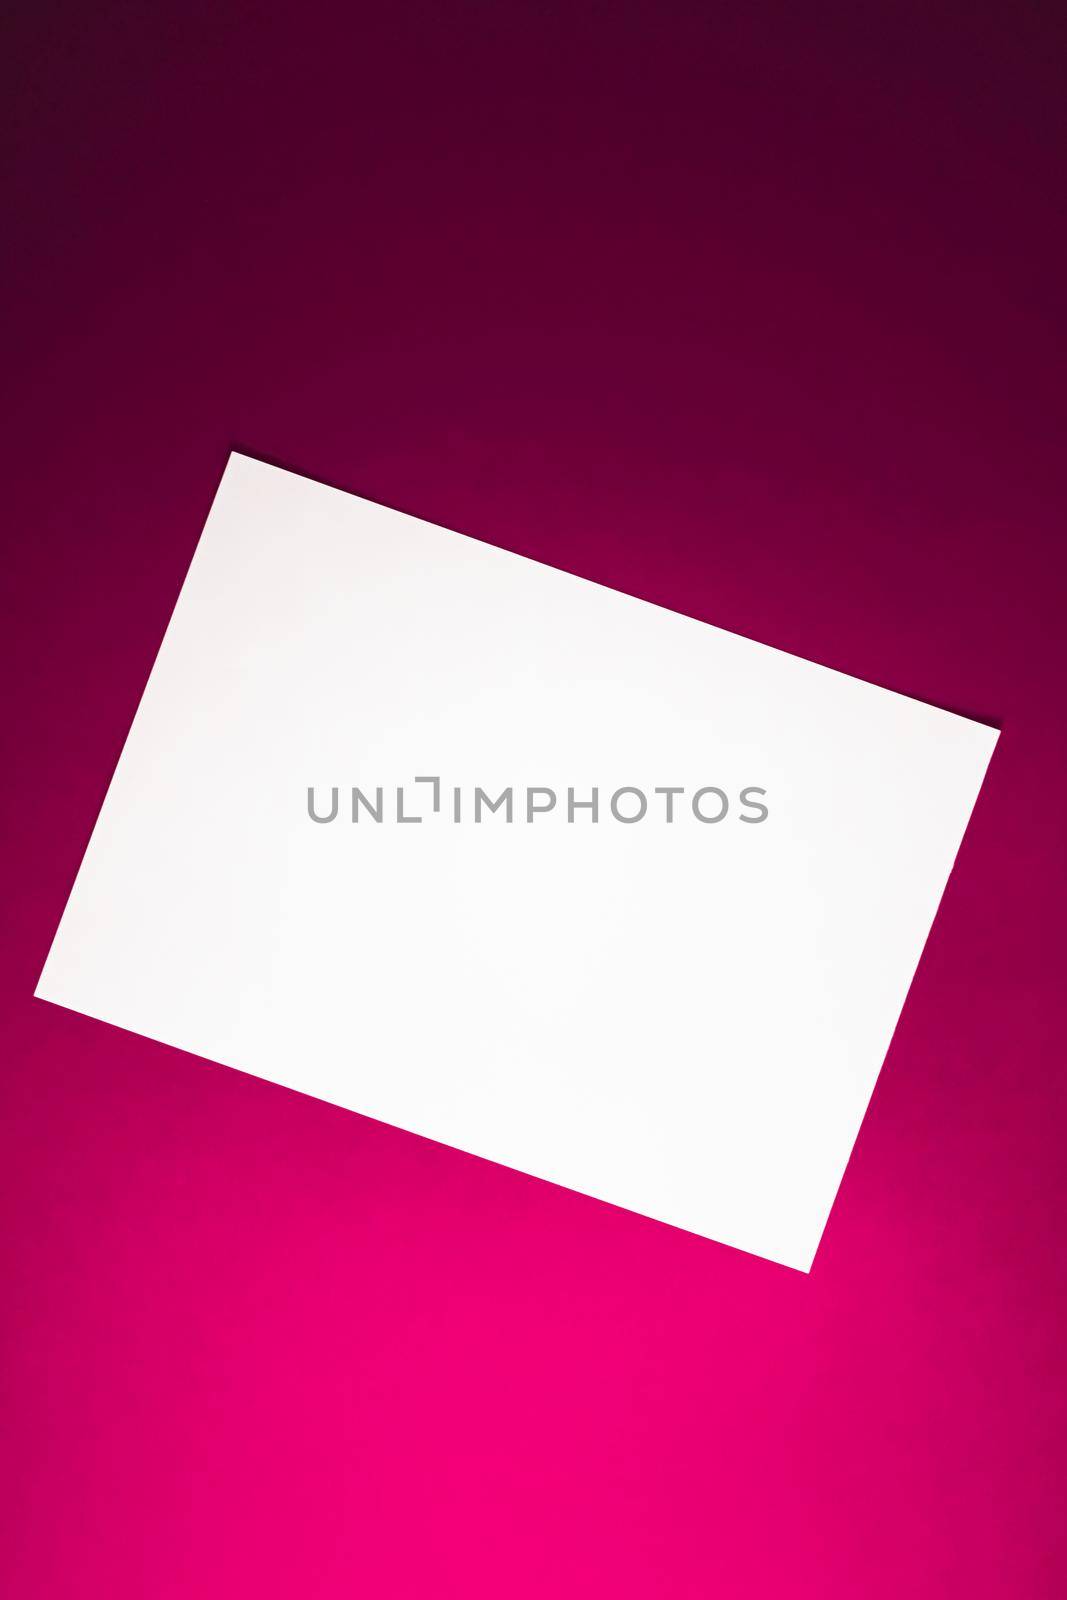 Blank A4 paper, white on pink background as office stationery flatlay, luxury branding flat lay and brand identity design for mockup.